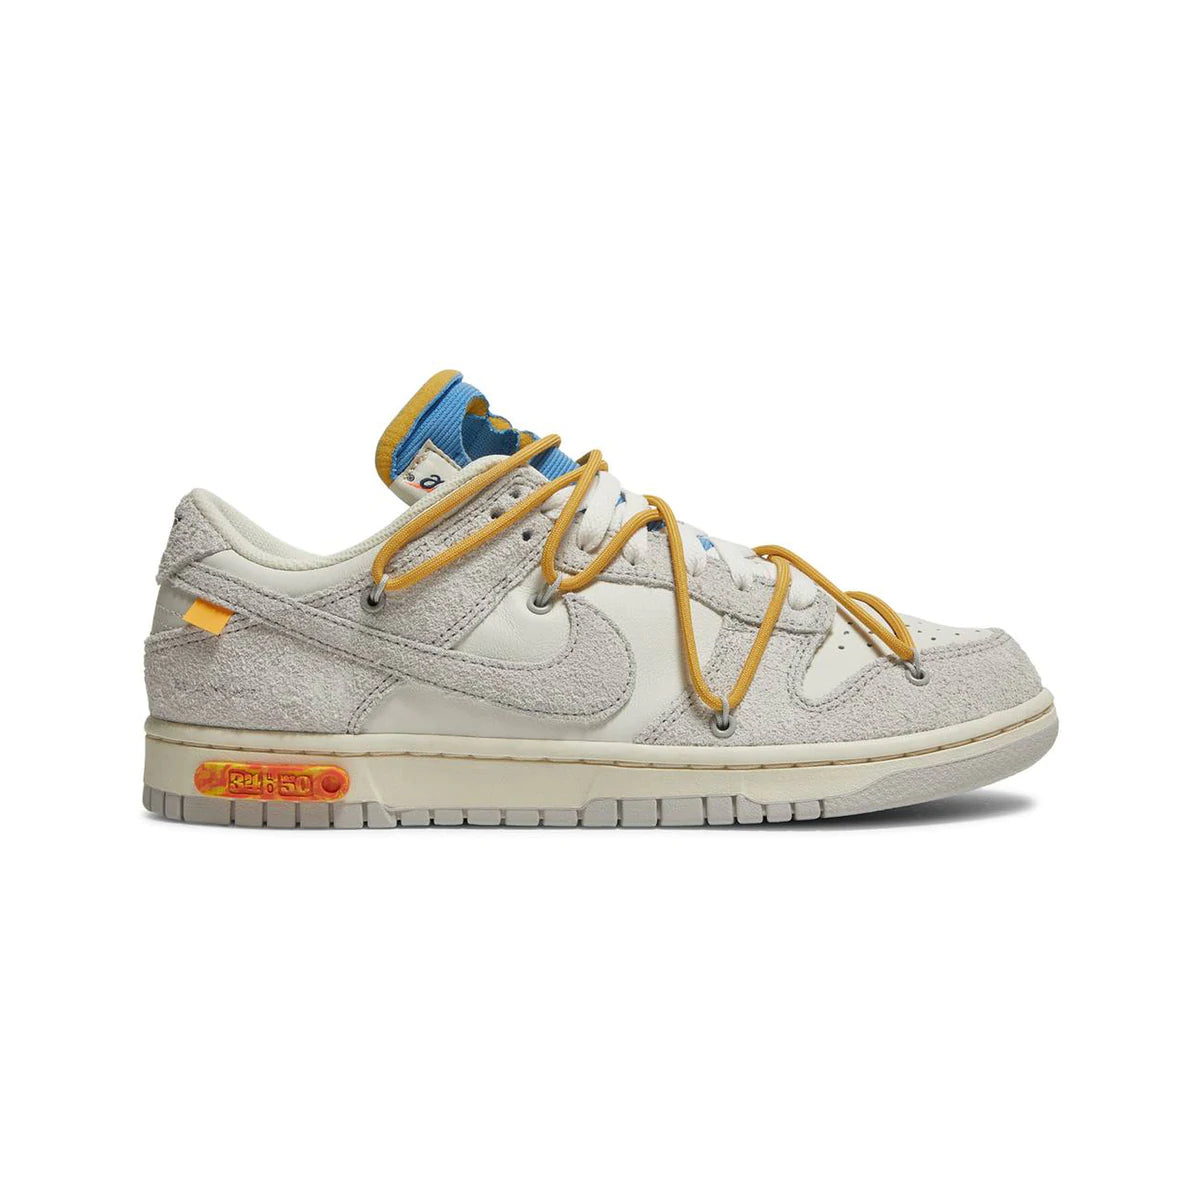 Off White x Nike Dunk “Lot 34 of 50”